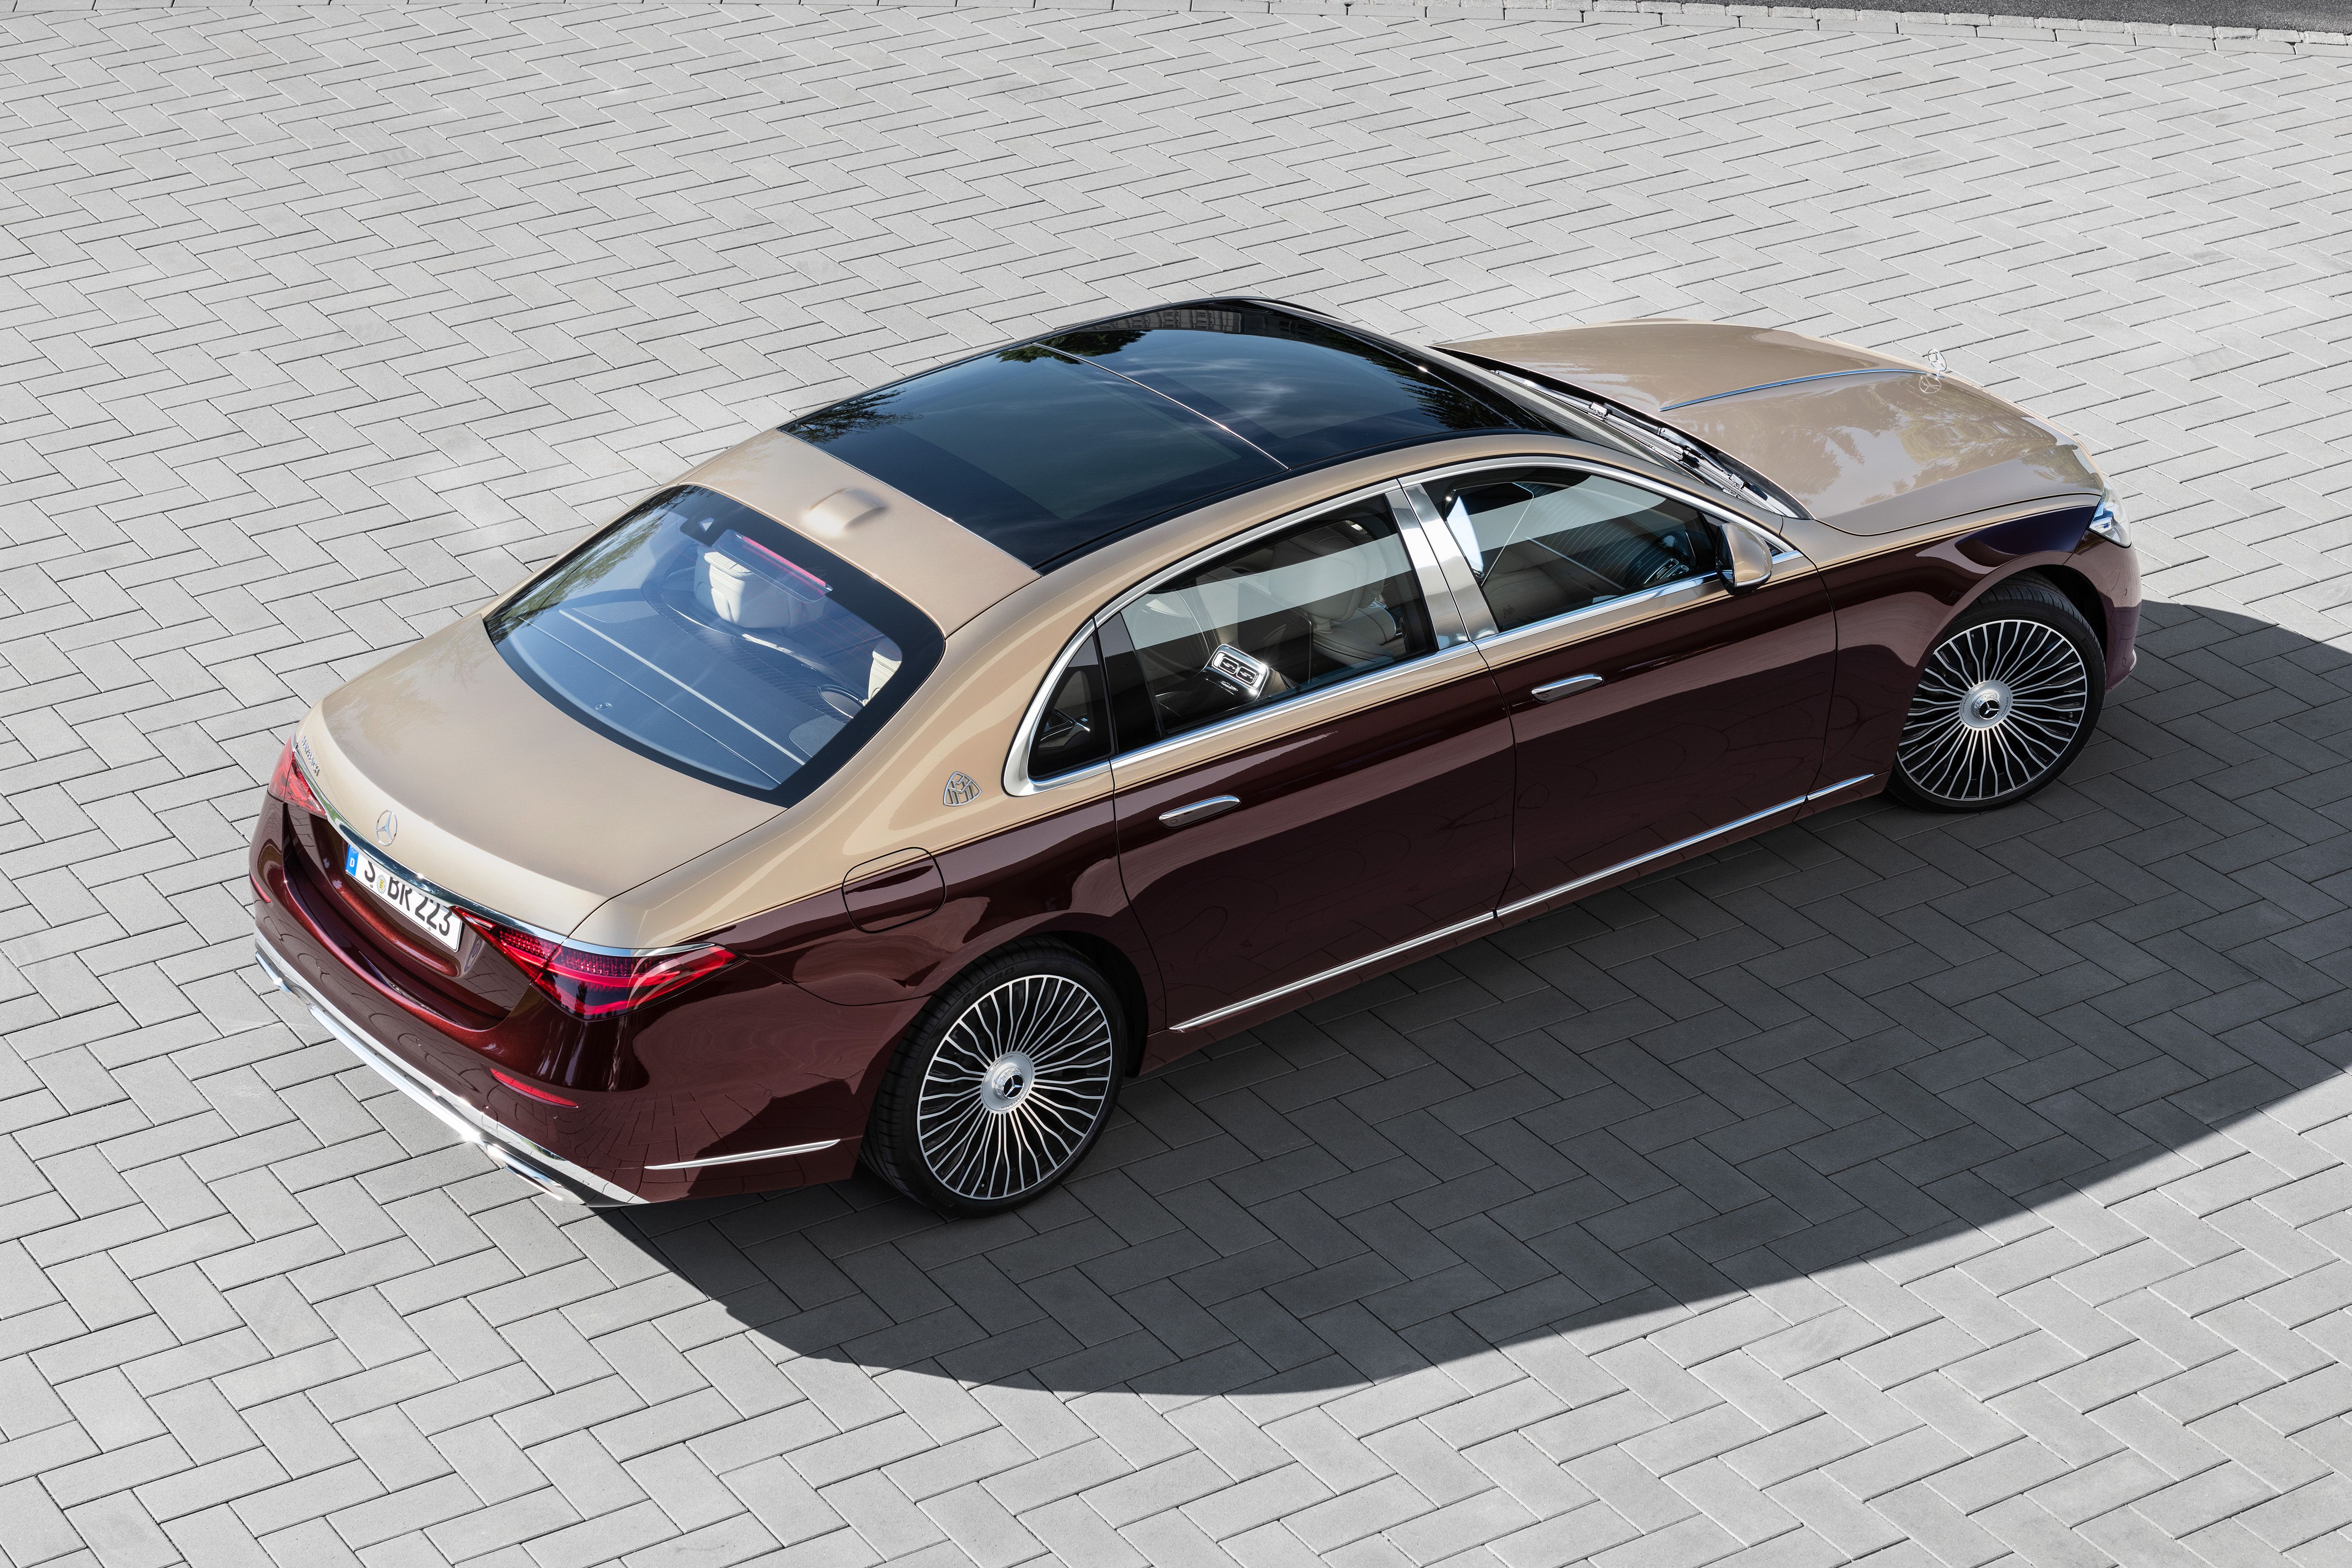 21 Mercedes Maybach S Class Costs 75 000 More Than Benz Model